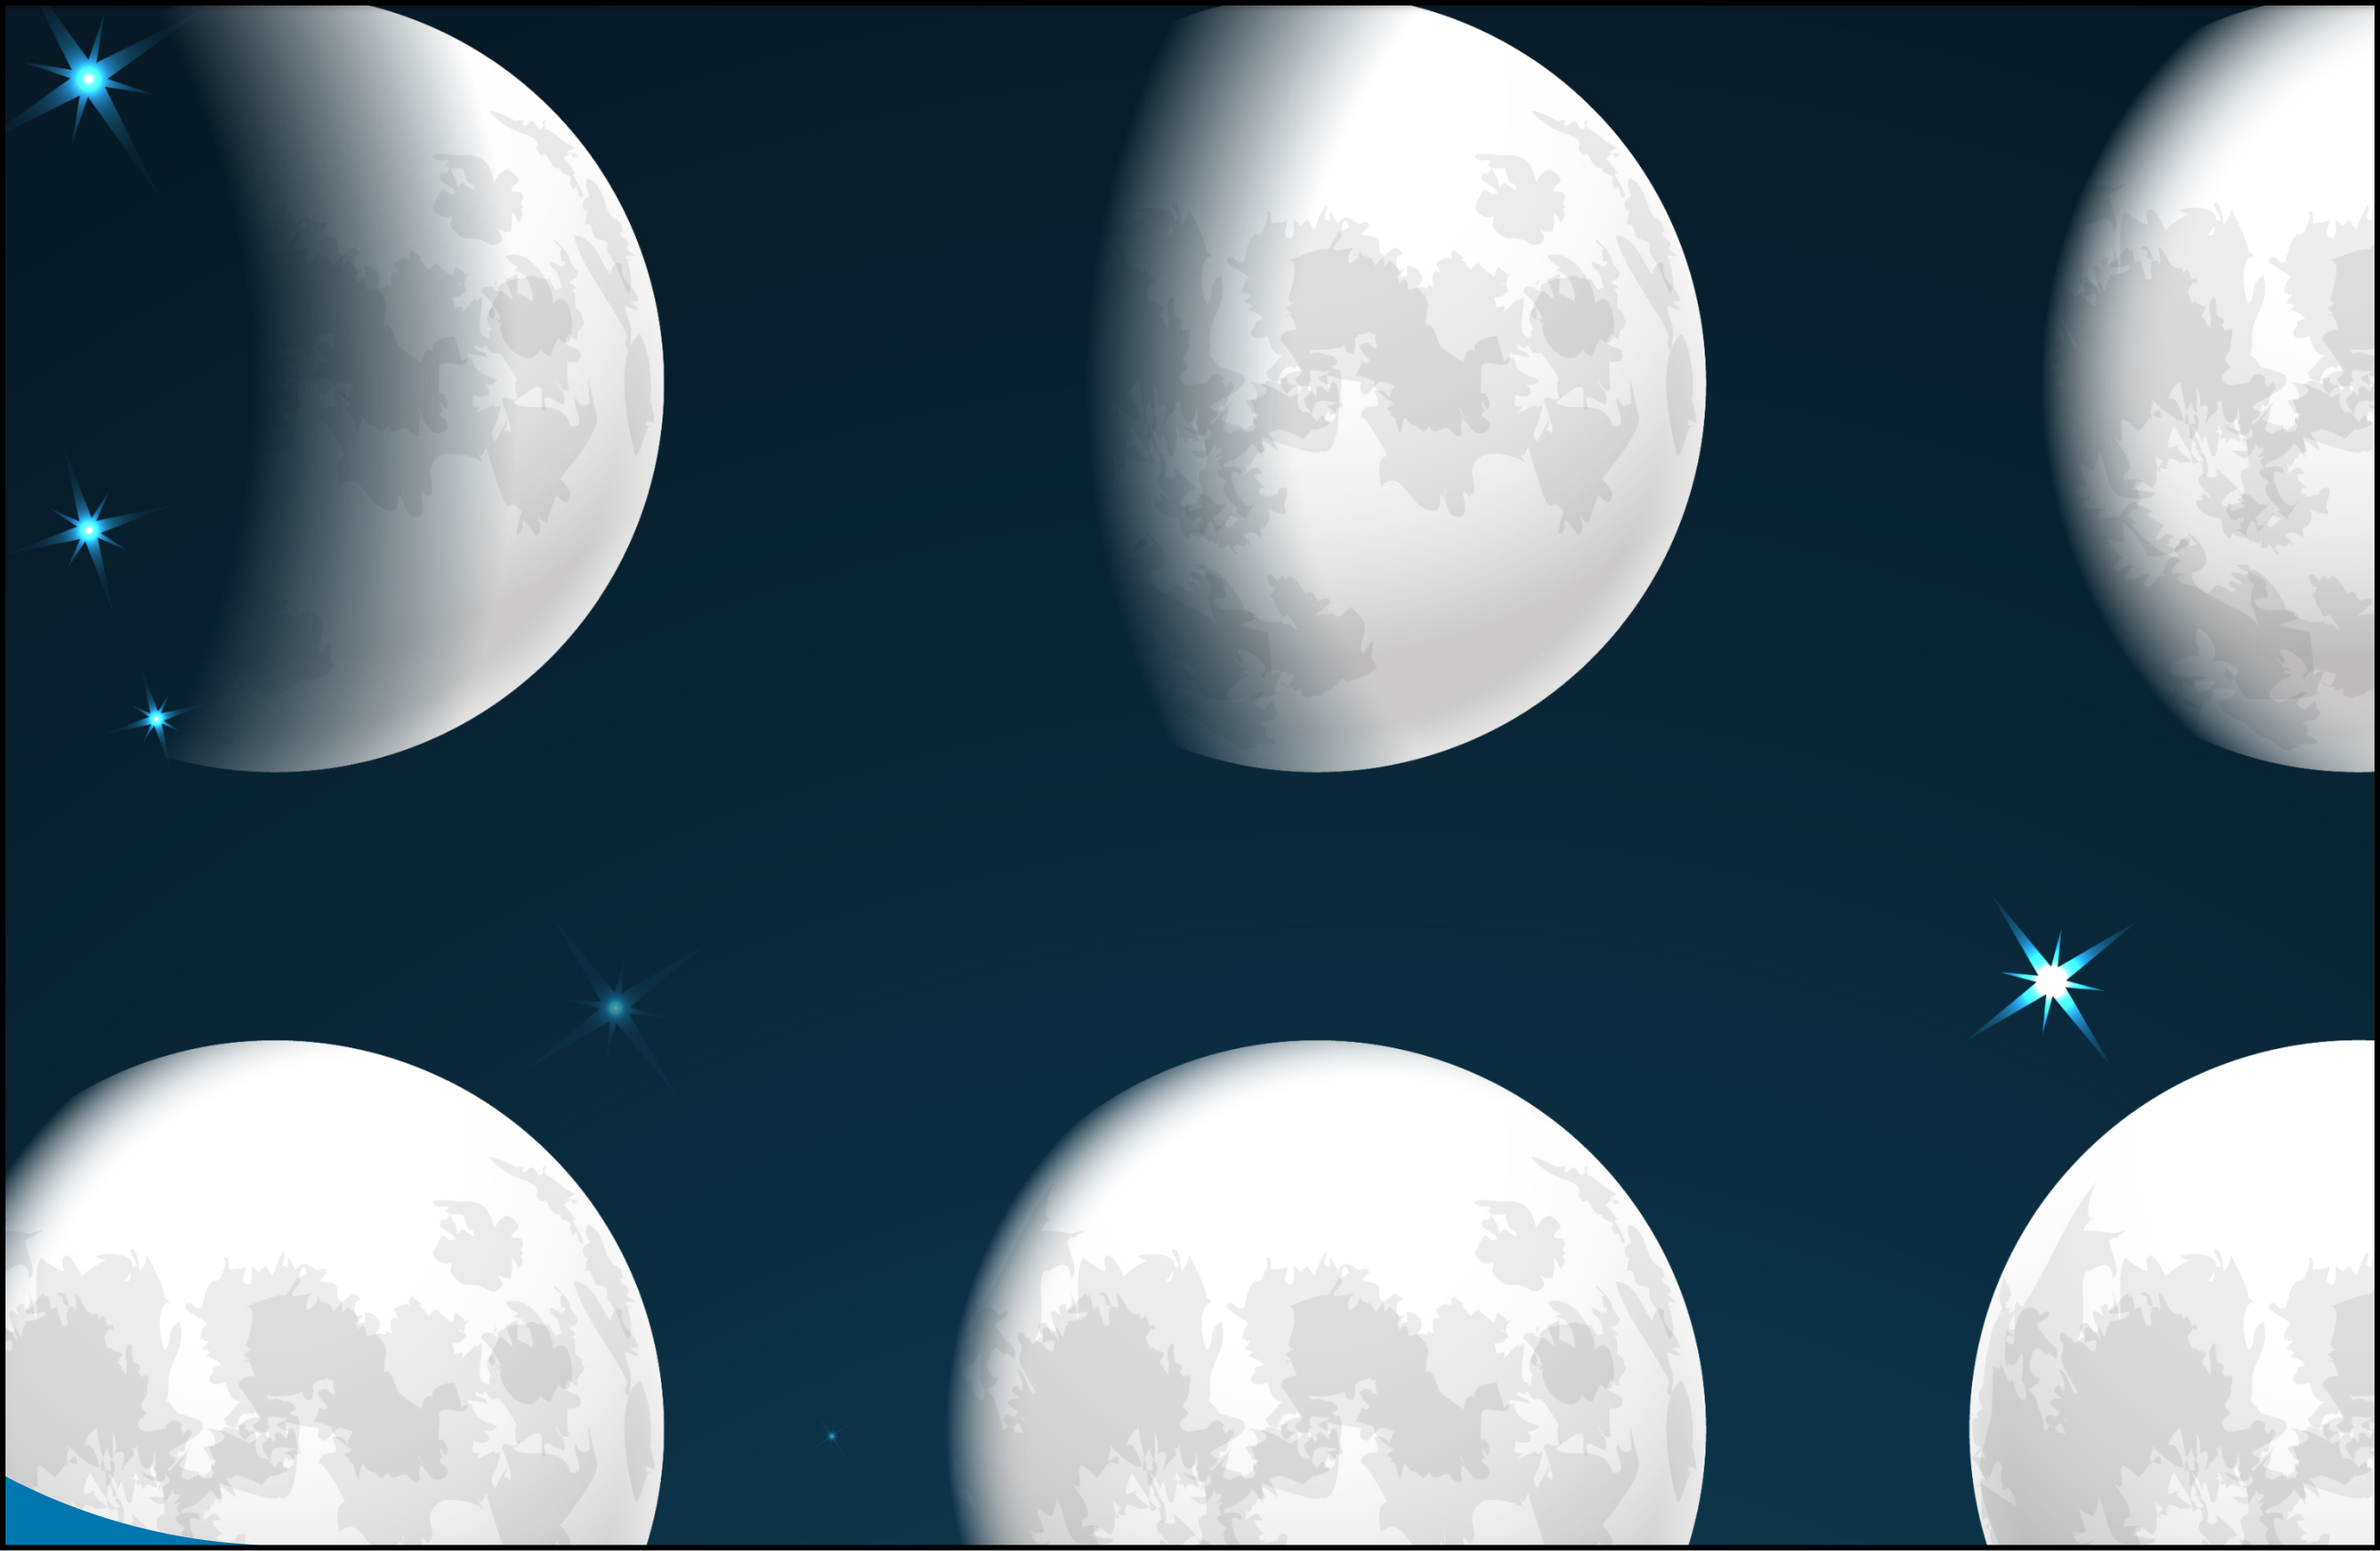 The 5 Stages of Project Management as Phases of the Moon